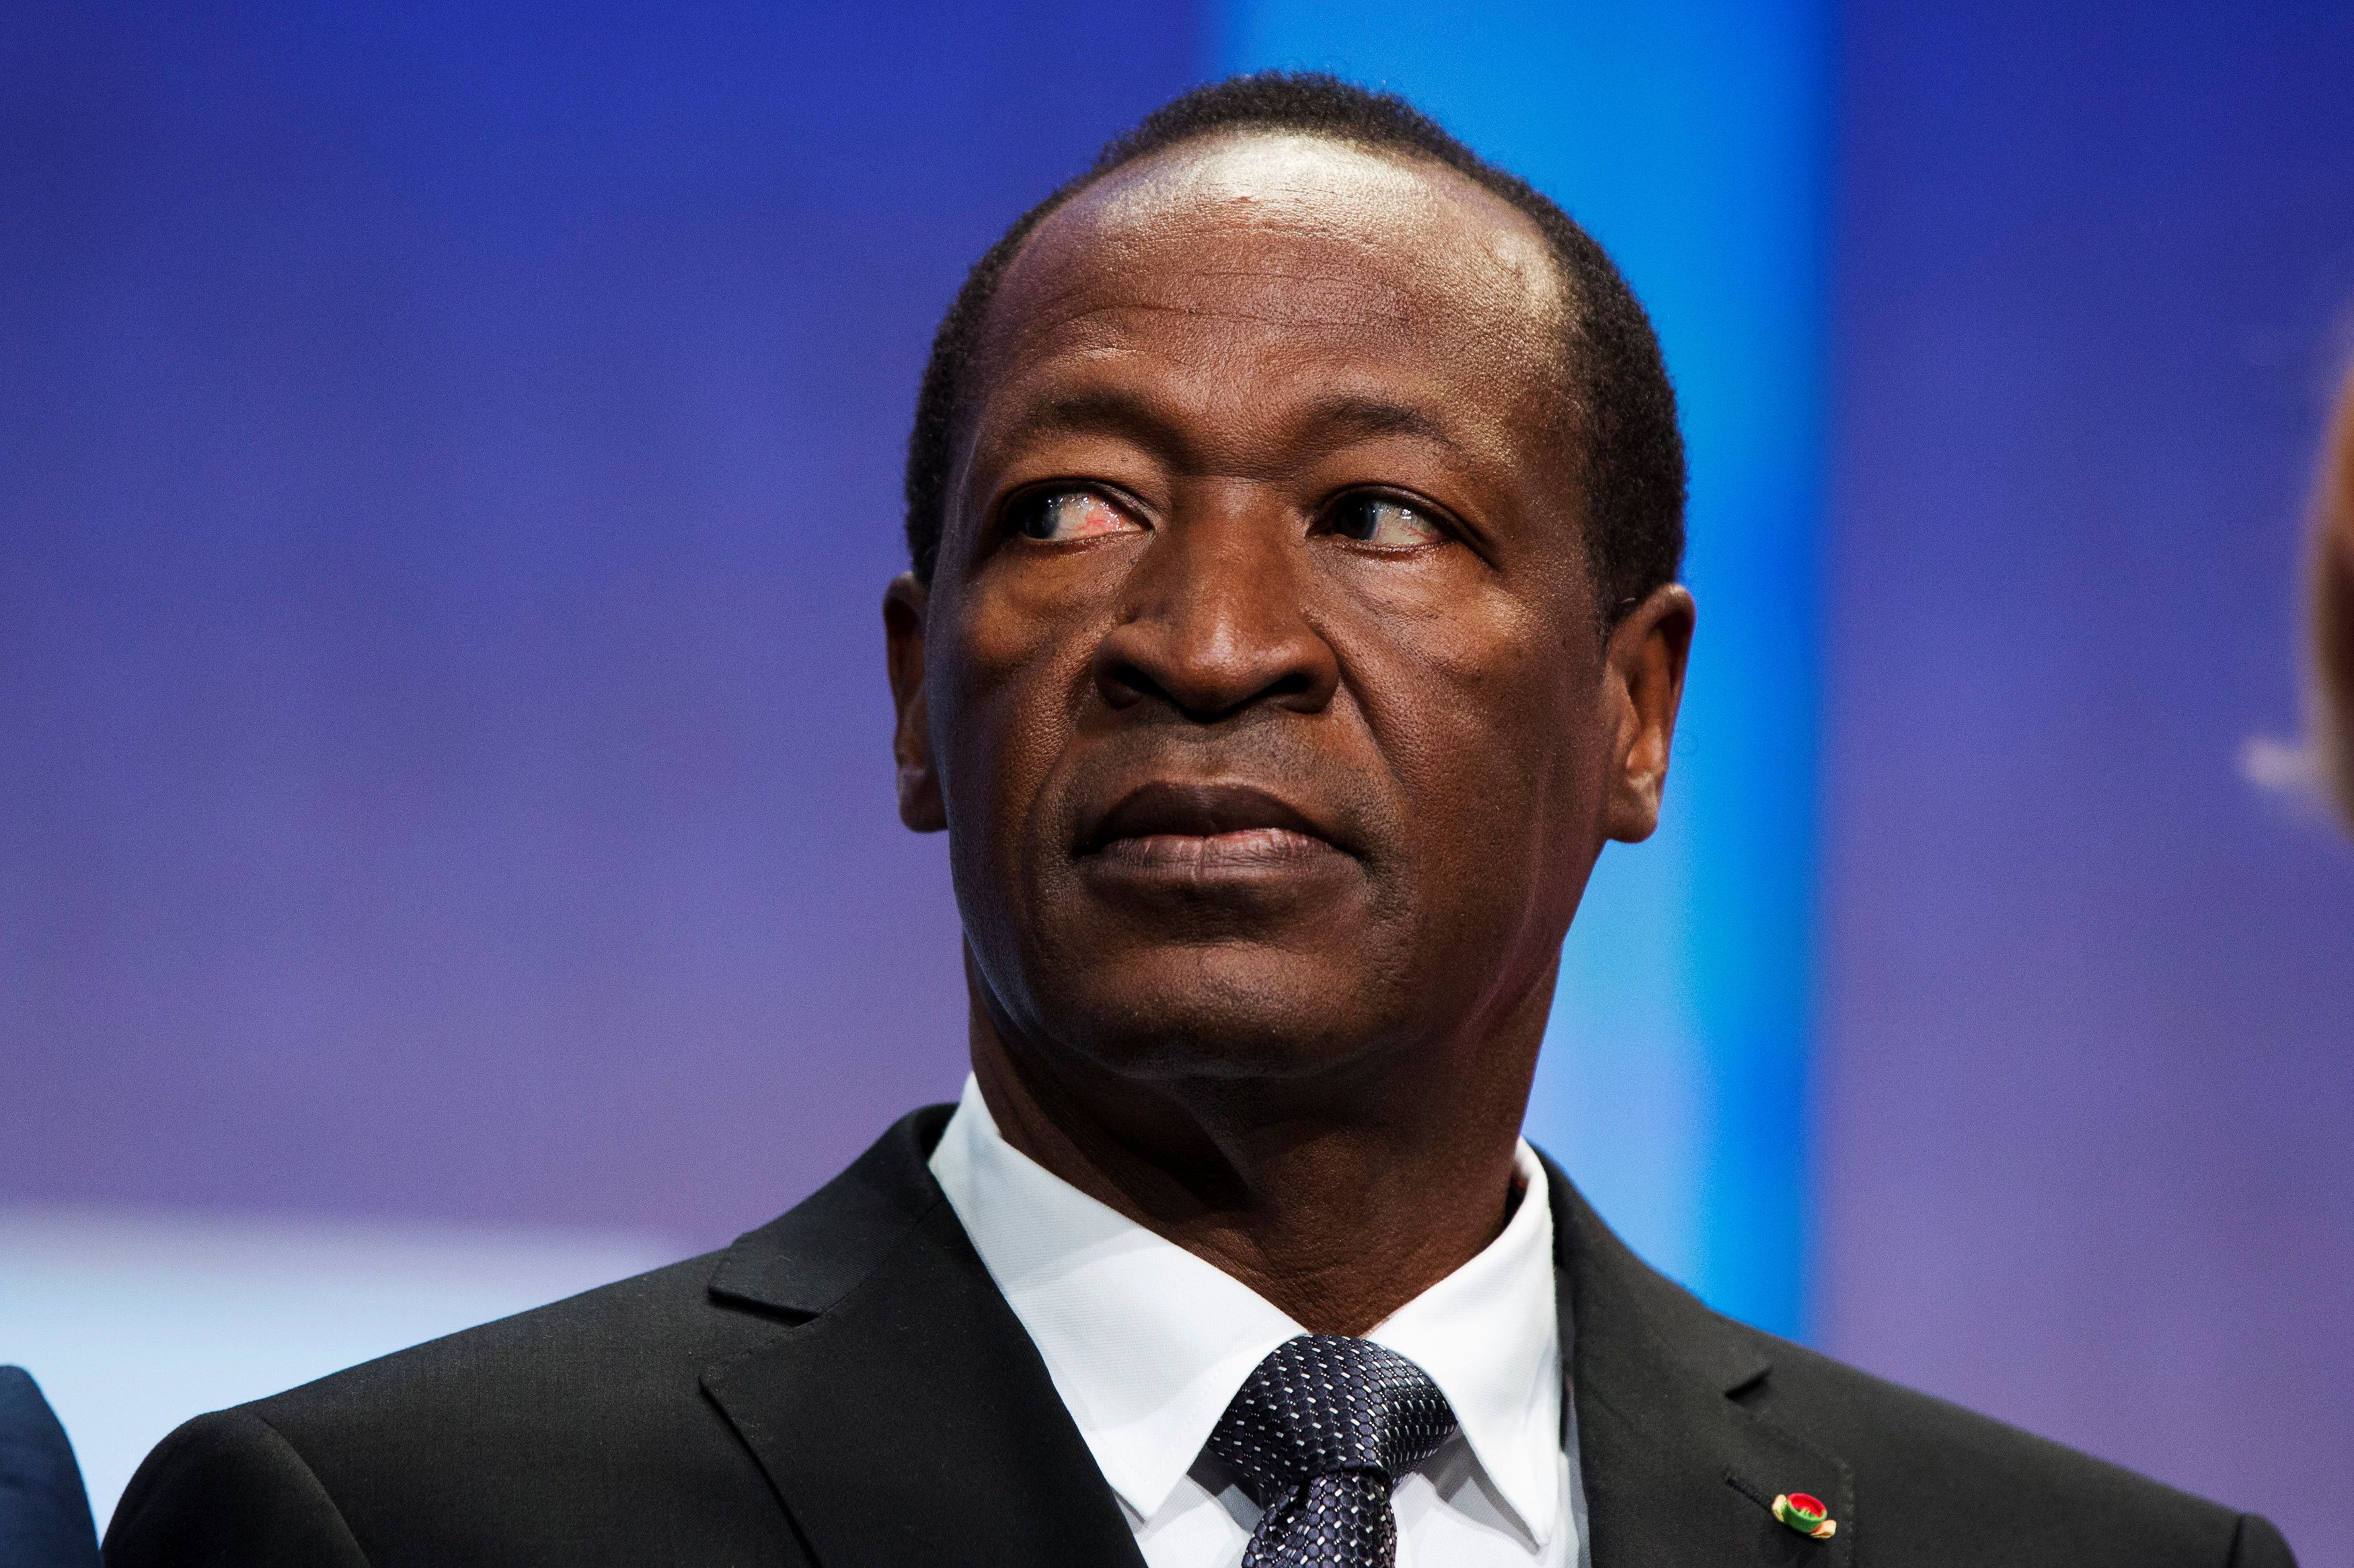  President of Burkina Faso, Blaise Compaore, in New York September 26, 2013. REUTERS/Lucas Jackson/File Photo